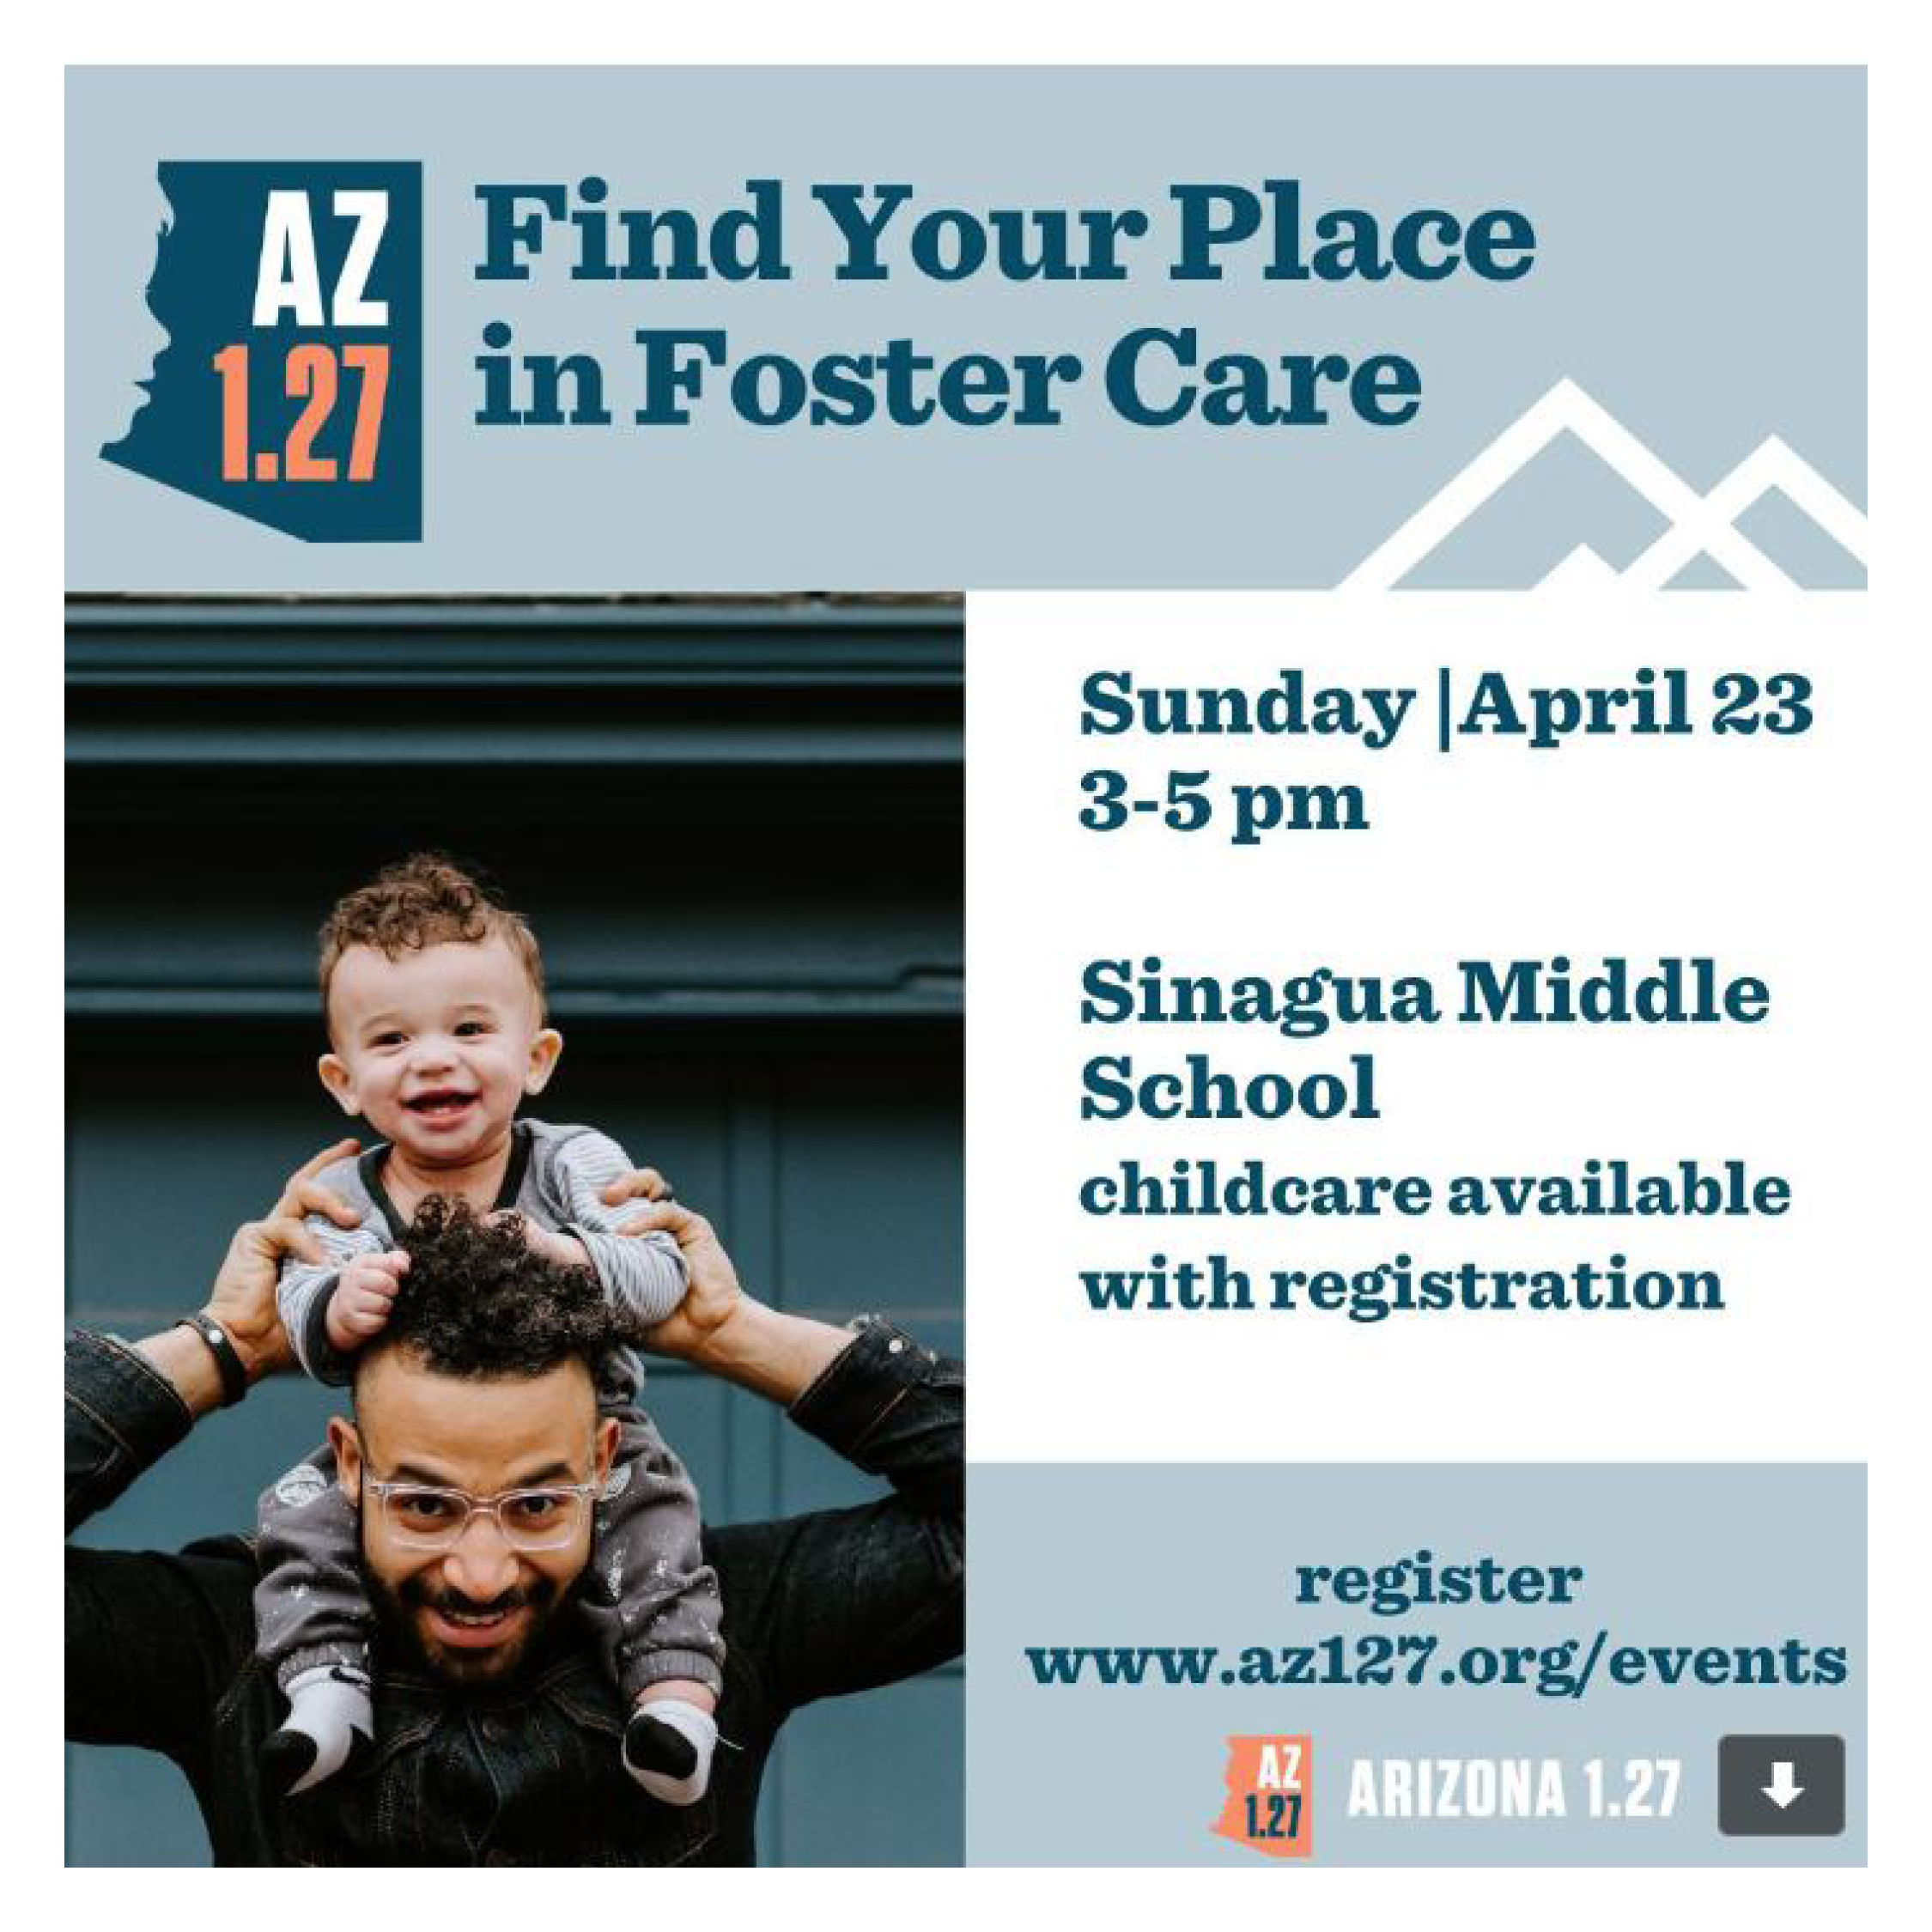 AZ 127 FIND YOUR PLACE IN FOSTER CARE (FLAGSTAFF) In partnership with AZ 127, CFC will be hosting a table this weekend! Make sure to stop by!